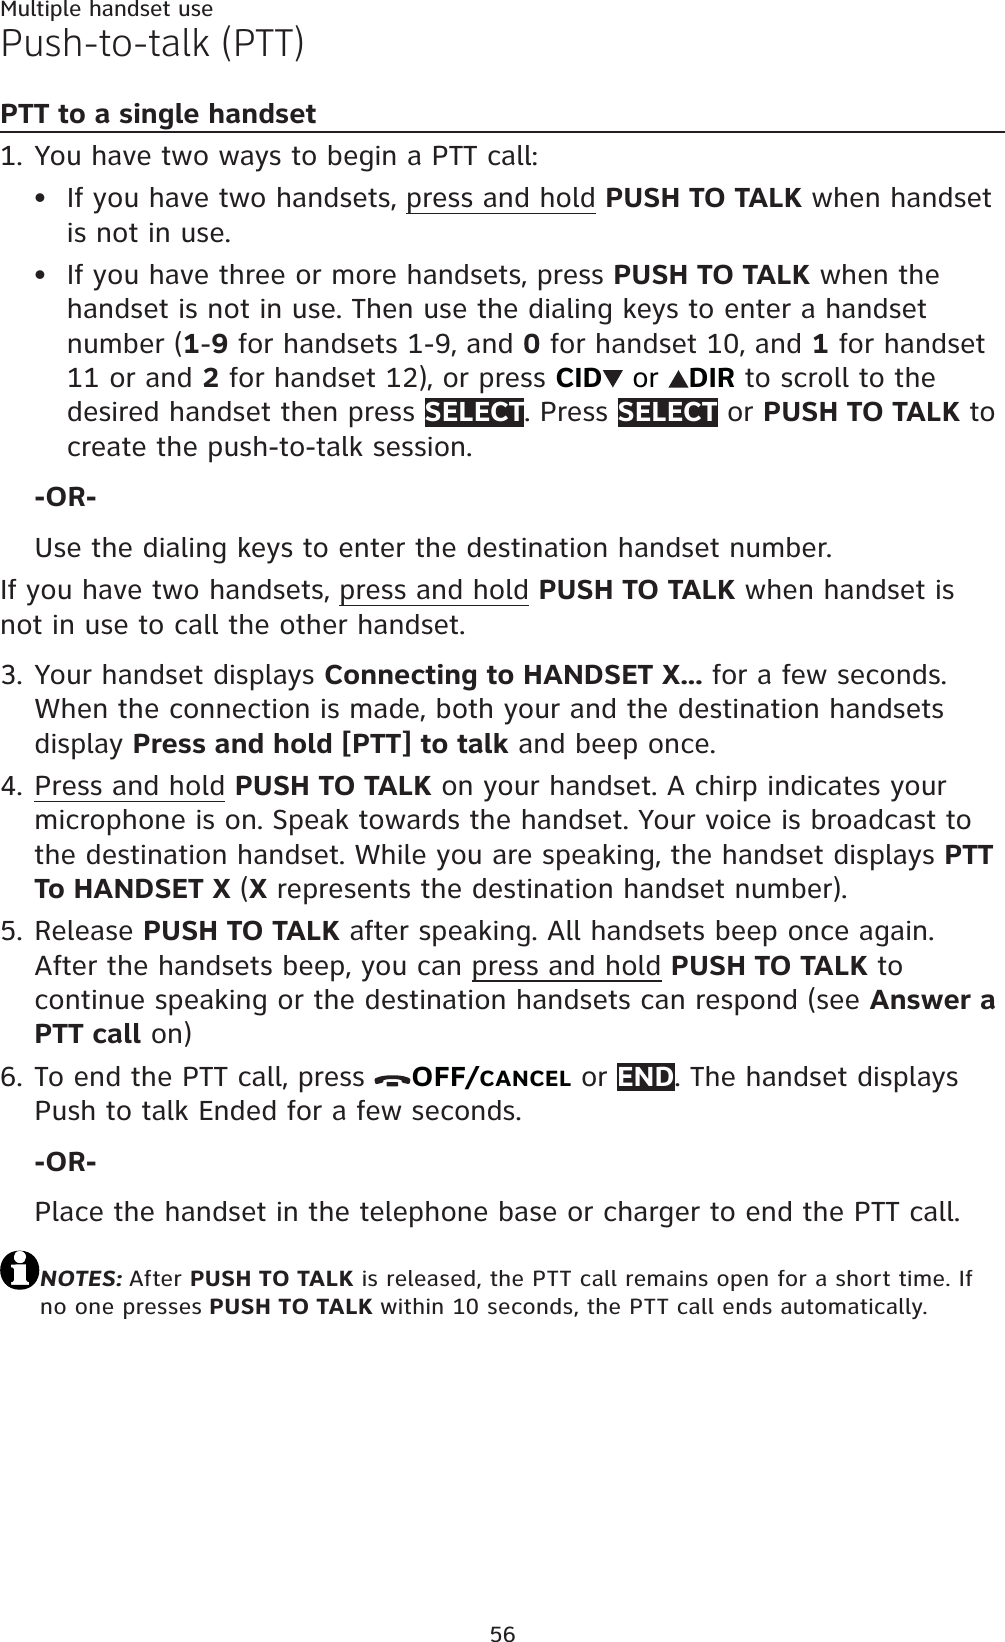 56Multiple handset usePush-to-talk (PTT)PTT to a single handsetYou have two ways to begin a PTT call:If you have two handsets, press and hold PUSH TO TALK when handset is not in use.If you have three or more handsets, press PUSH TO TALK when the handset is not in use. Then use the dialing keys to enter a handset number (1-9 for handsets 1-9, and 0 for handset 10, and 1 for handset 11 or and 2 for handset 12), or press CID  or  DIR to scroll to the desired handset then press SELECT. Press SELECT or PUSH TO TALK to create the push-to-talk session.-OR-Use the dialing keys to enter the destination handset number.If you have two handsets, press and hold PUSH TO TALK when handset is not in use to call the other handset.Your handset displays Connecting to HANDSET X... for a few seconds. When the connection is made, both your and the destination handsets display Press and hold [PTT] to talk and beep once.Press and hold PUSH TO TALK on your handset. A chirp indicates your microphone is on. Speak towards the handset. Your voice is broadcast to the destination handset. While you are speaking, the handset displays PTT To HANDSET X (X represents the destination handset number).Release PUSH TO TALK after speaking. All handsets beep once again. After the handsets beep, you can press and hold PUSH TO TALK to continue speaking or the destination handsets can respond (see Answer a PTT call on)To end the PTT call, press  OFF/CANCEL or END. The handset displays Push to talk Ended for a few seconds.-OR-Place the handset in the telephone base or charger to end the PTT call.NOTES: After PUSH TO TALK is released, the PTT call remains open for a short time. If no one presses PUSH TO TALK within 10 seconds, the PTT call ends automatically.1.••3.4.5.6.